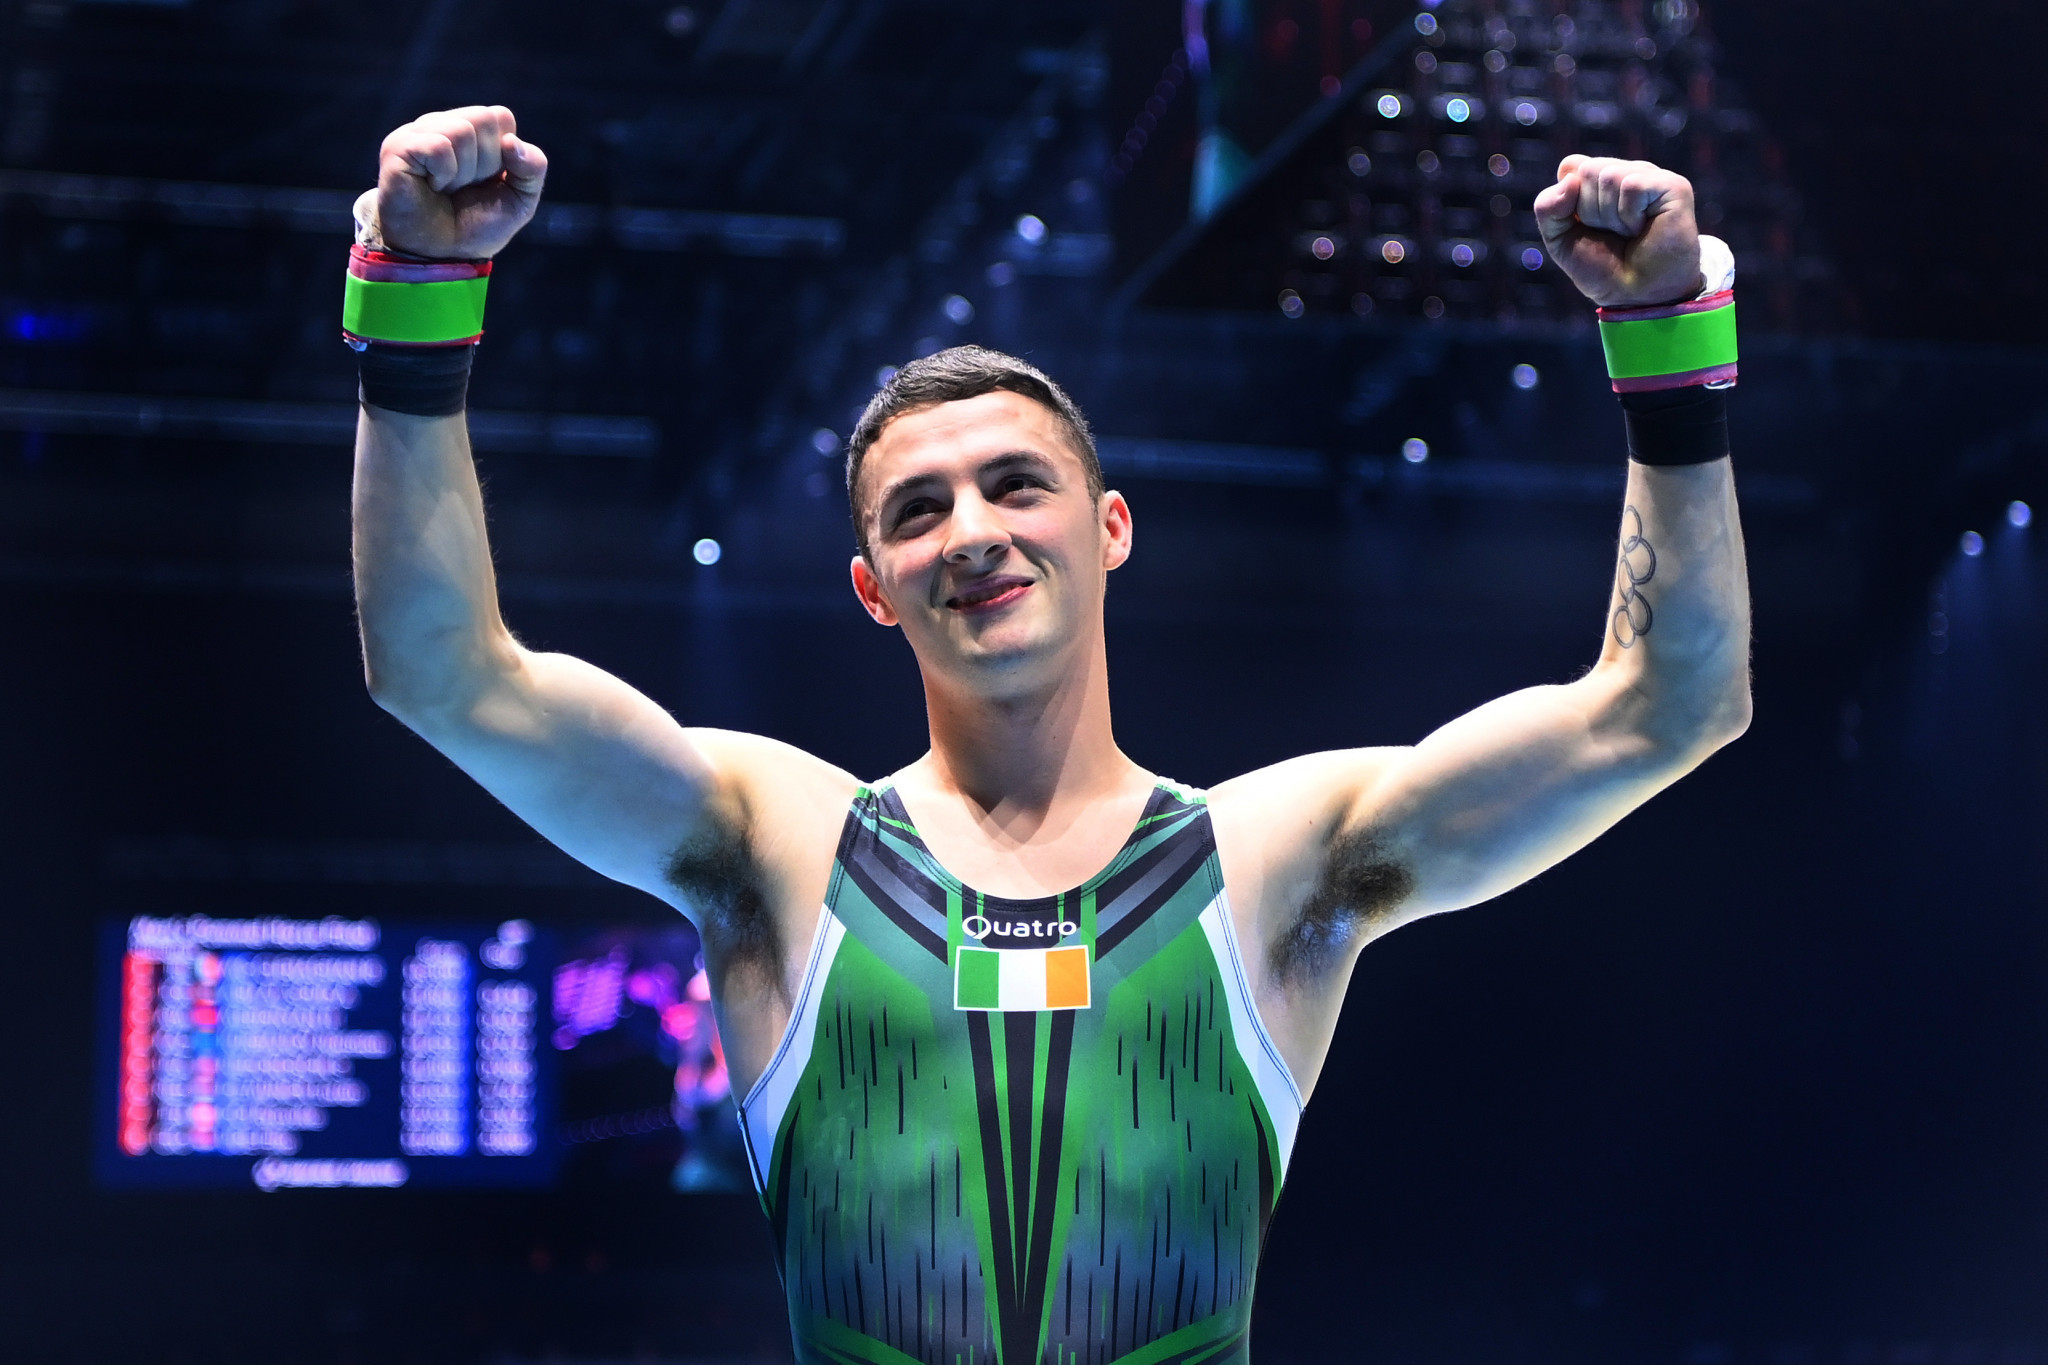 McClenaghan wins Ireland's first-ever gold at Artistic Gymnastics World Championships